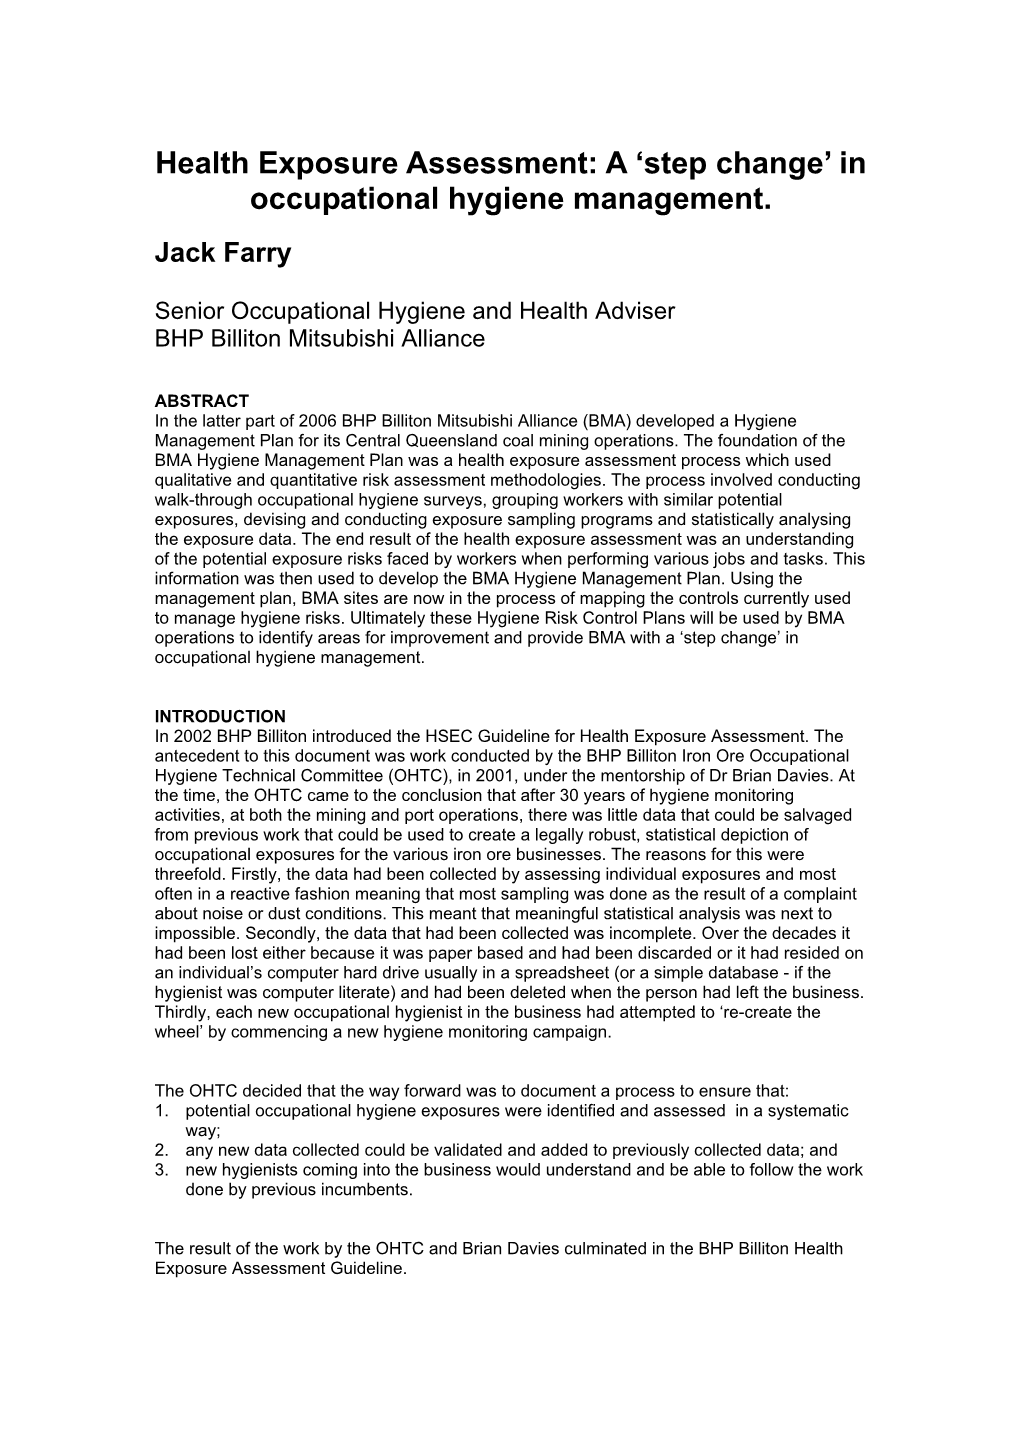 In Occupational Hygiene Management. Jack Farry